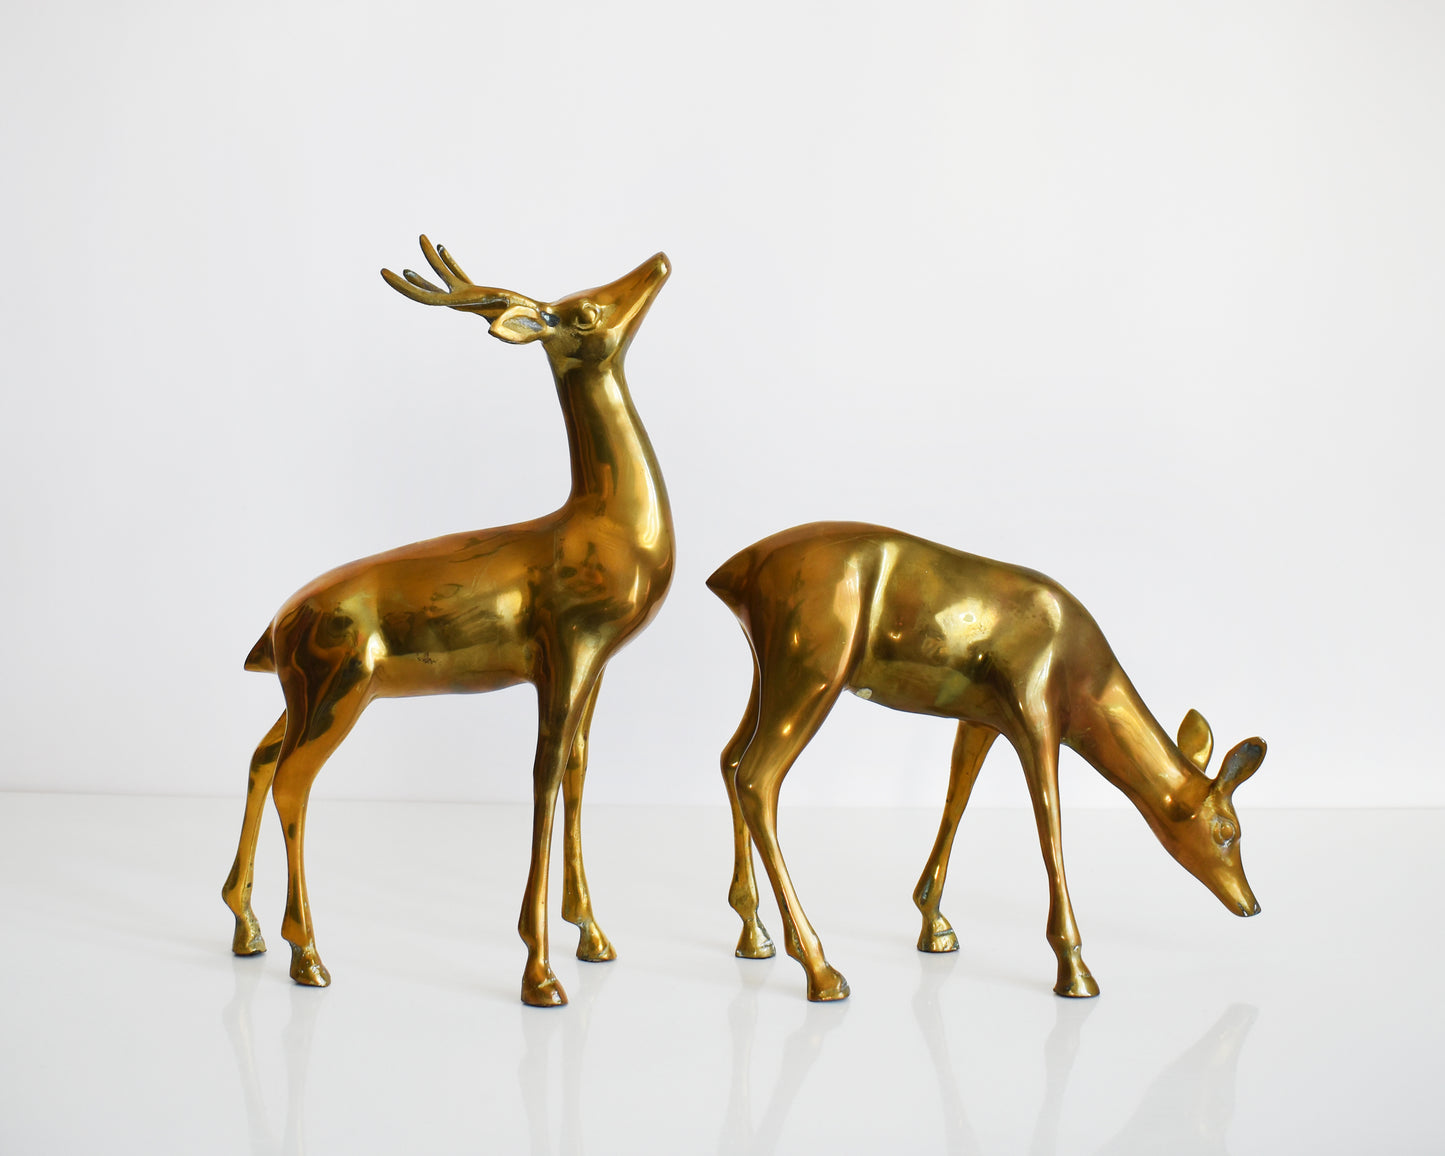 A pair of two large vintage brass deer figurines. One buck and one doe make up this collection, with the buck standing upright displaying his antlers and the doe is grazing on the ground.